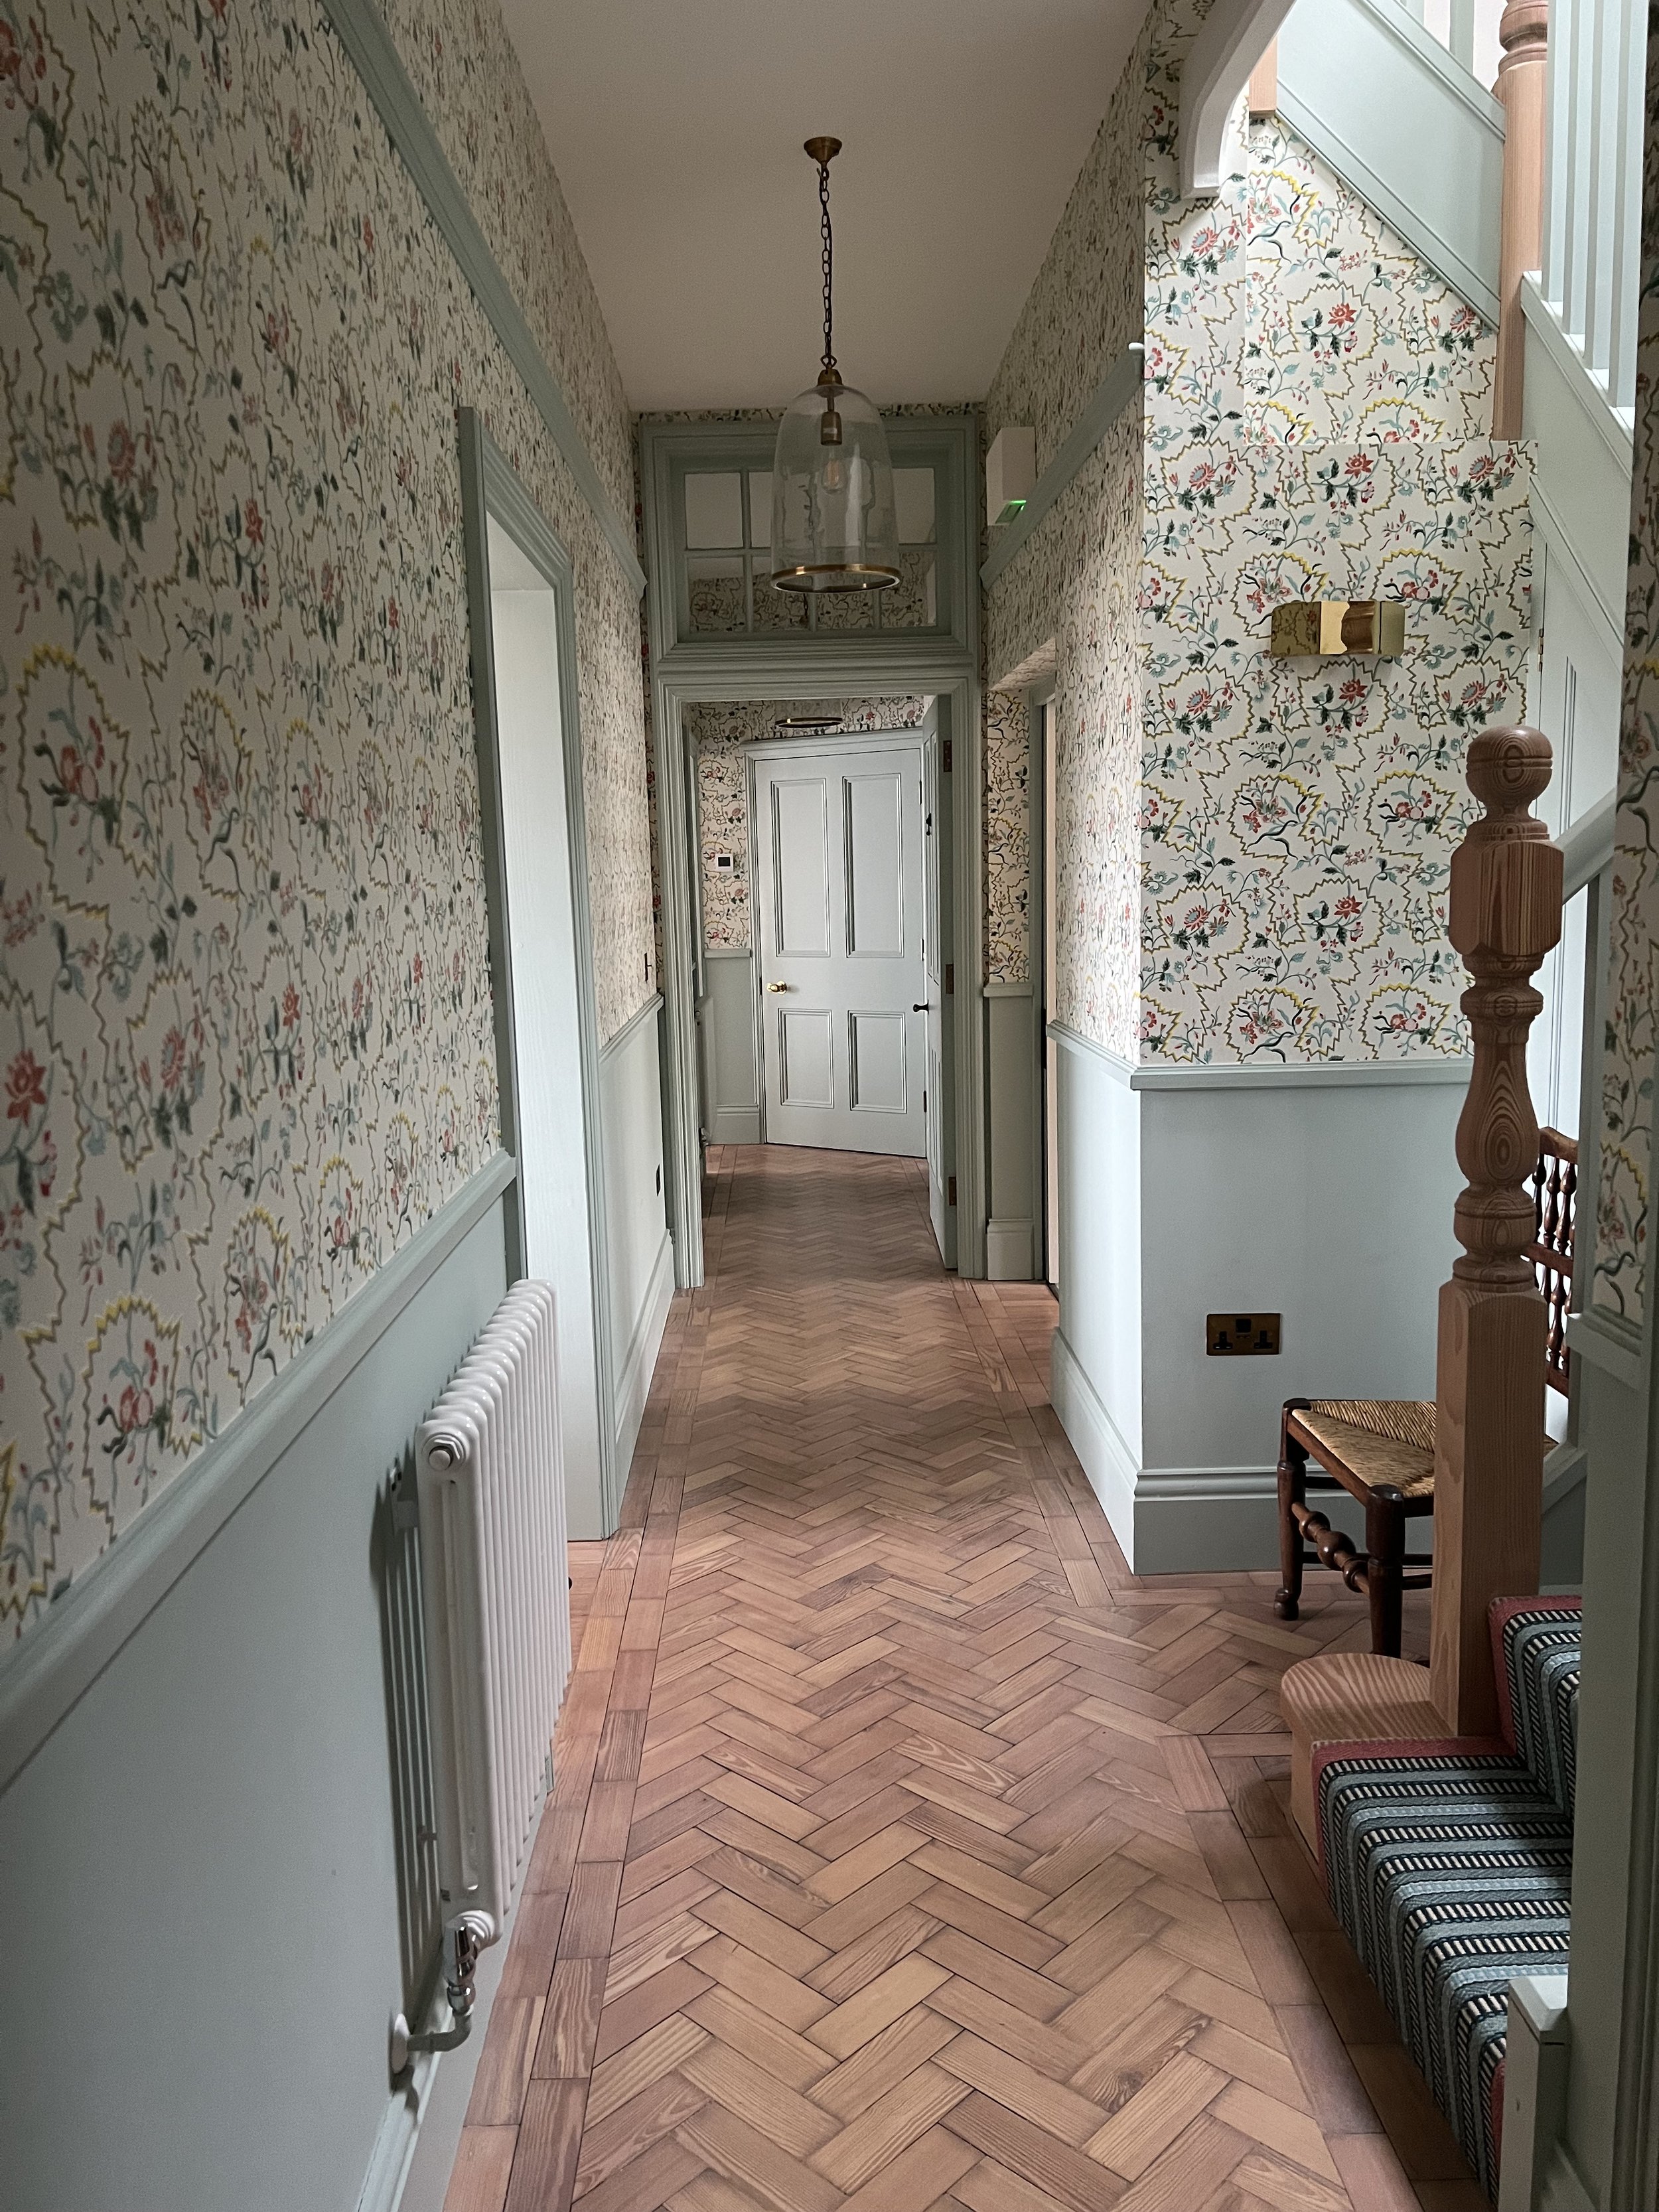 The stair hall with Pierre Frey wallpaper